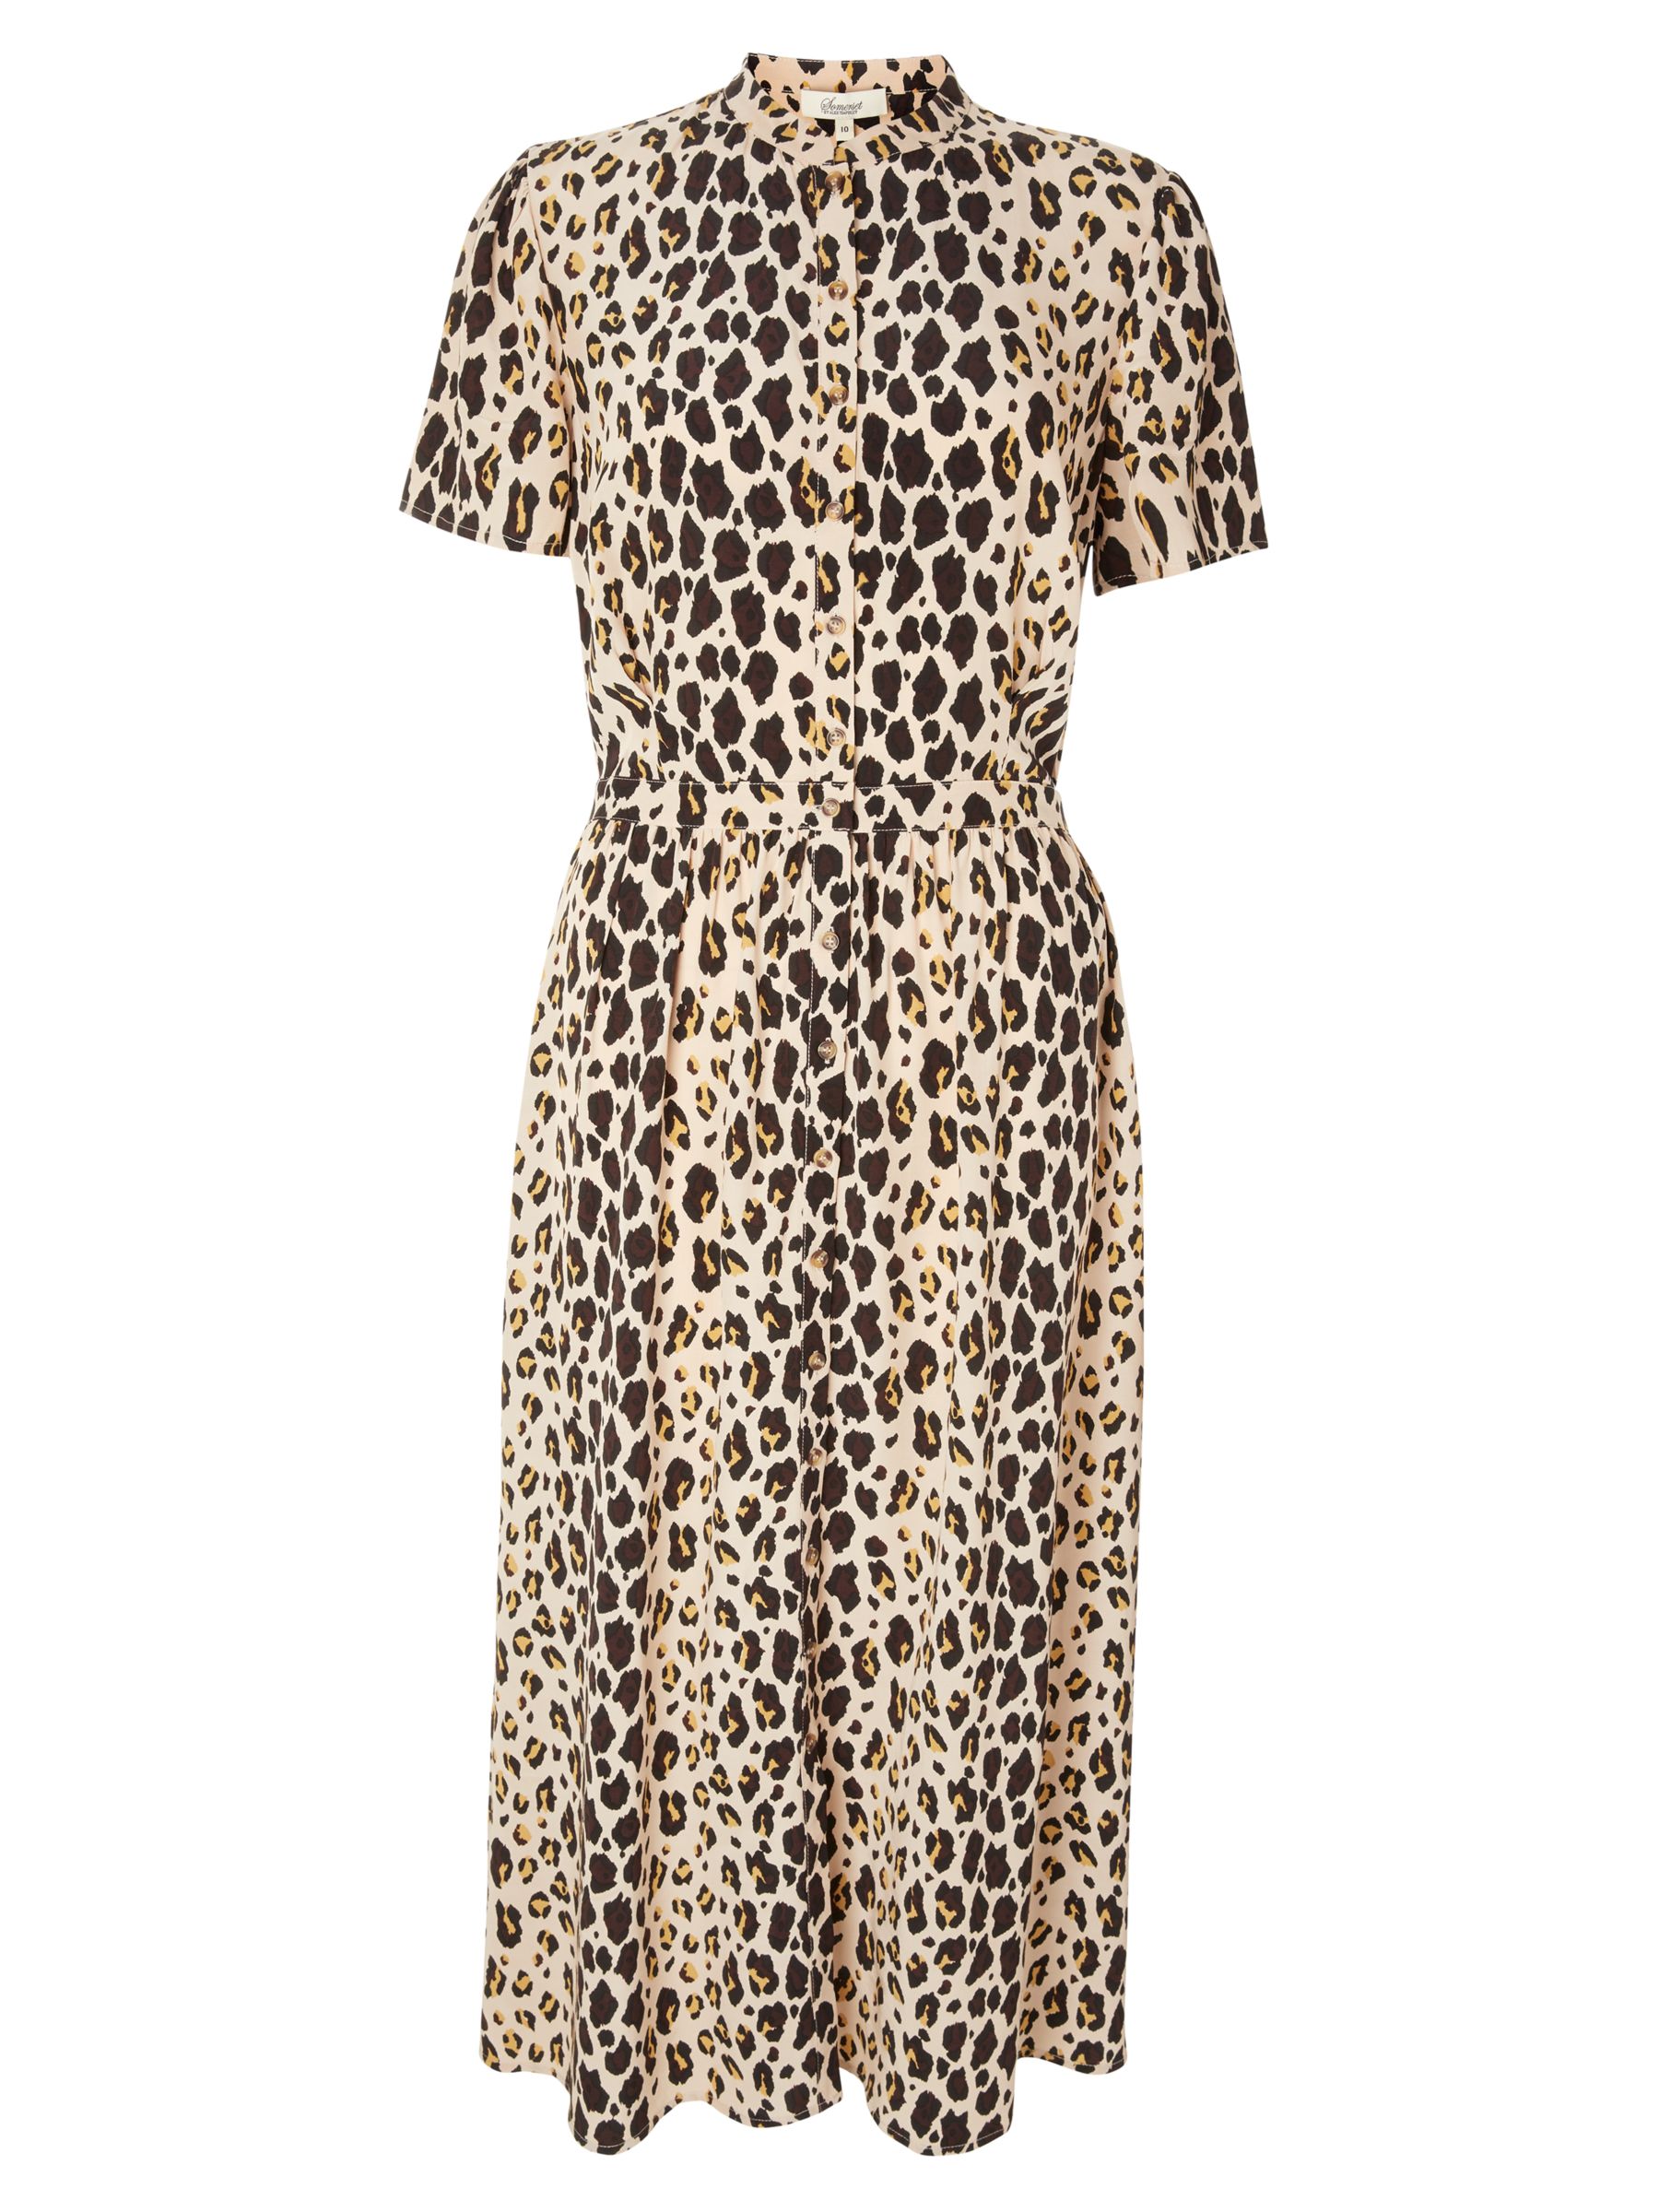 BuySomerset by Alice Temperley Leopard Print Shirt Dress, Multi, 8 Online at johnlewis.com